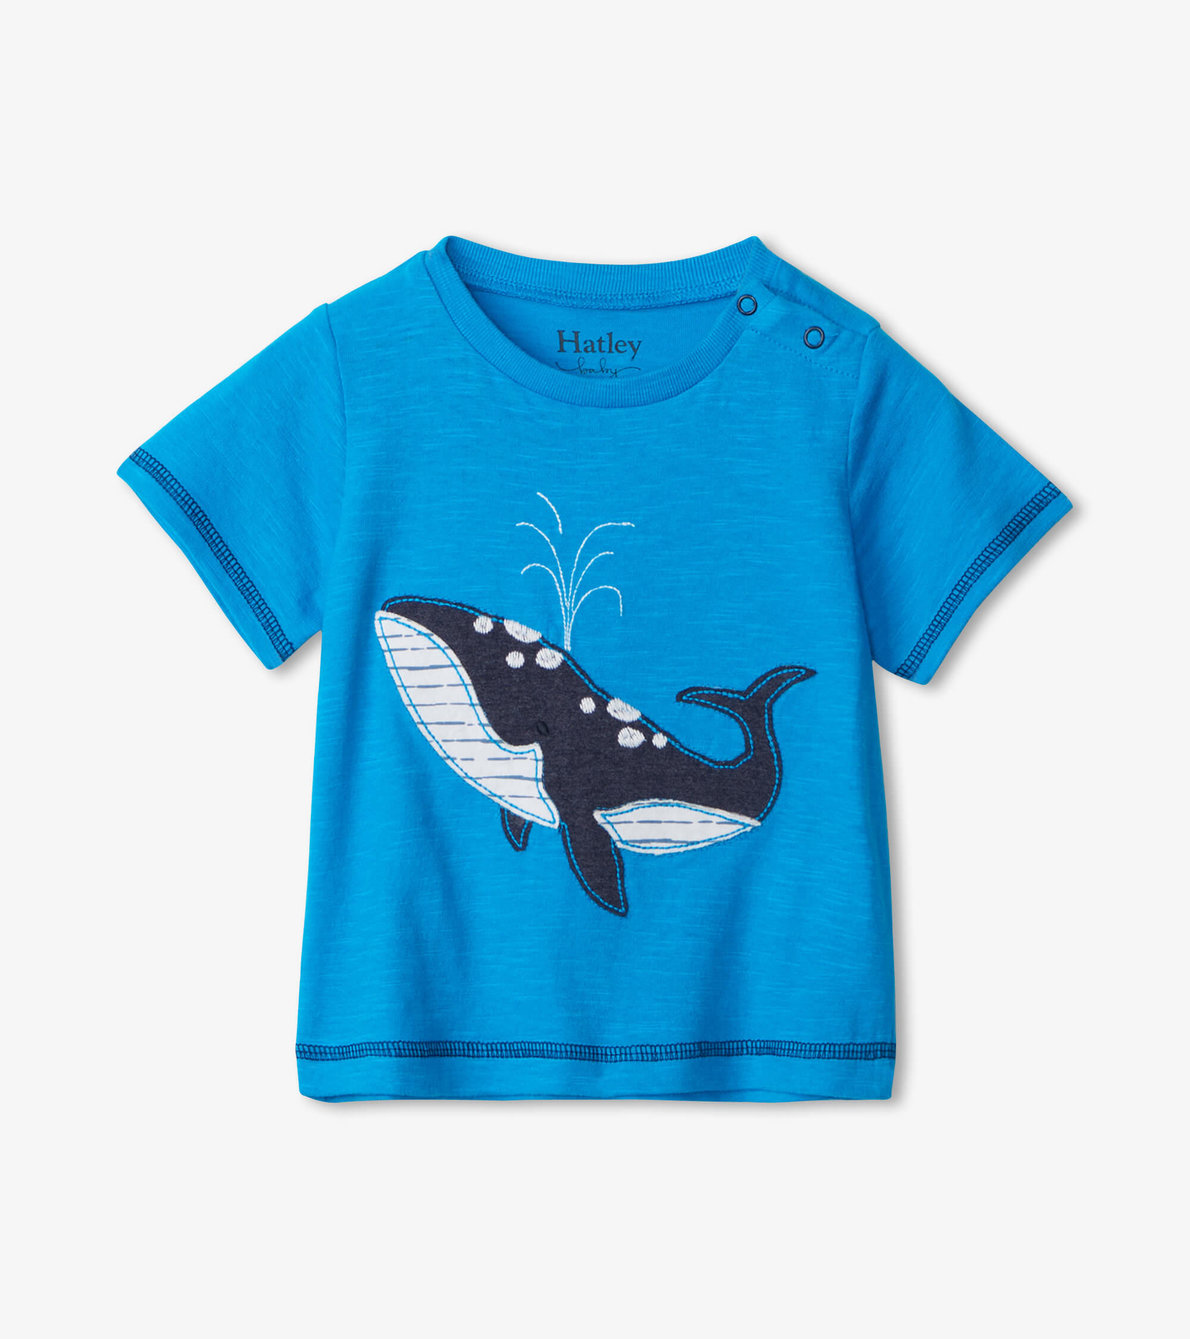 View larger image of Whale Baby Graphic Tee